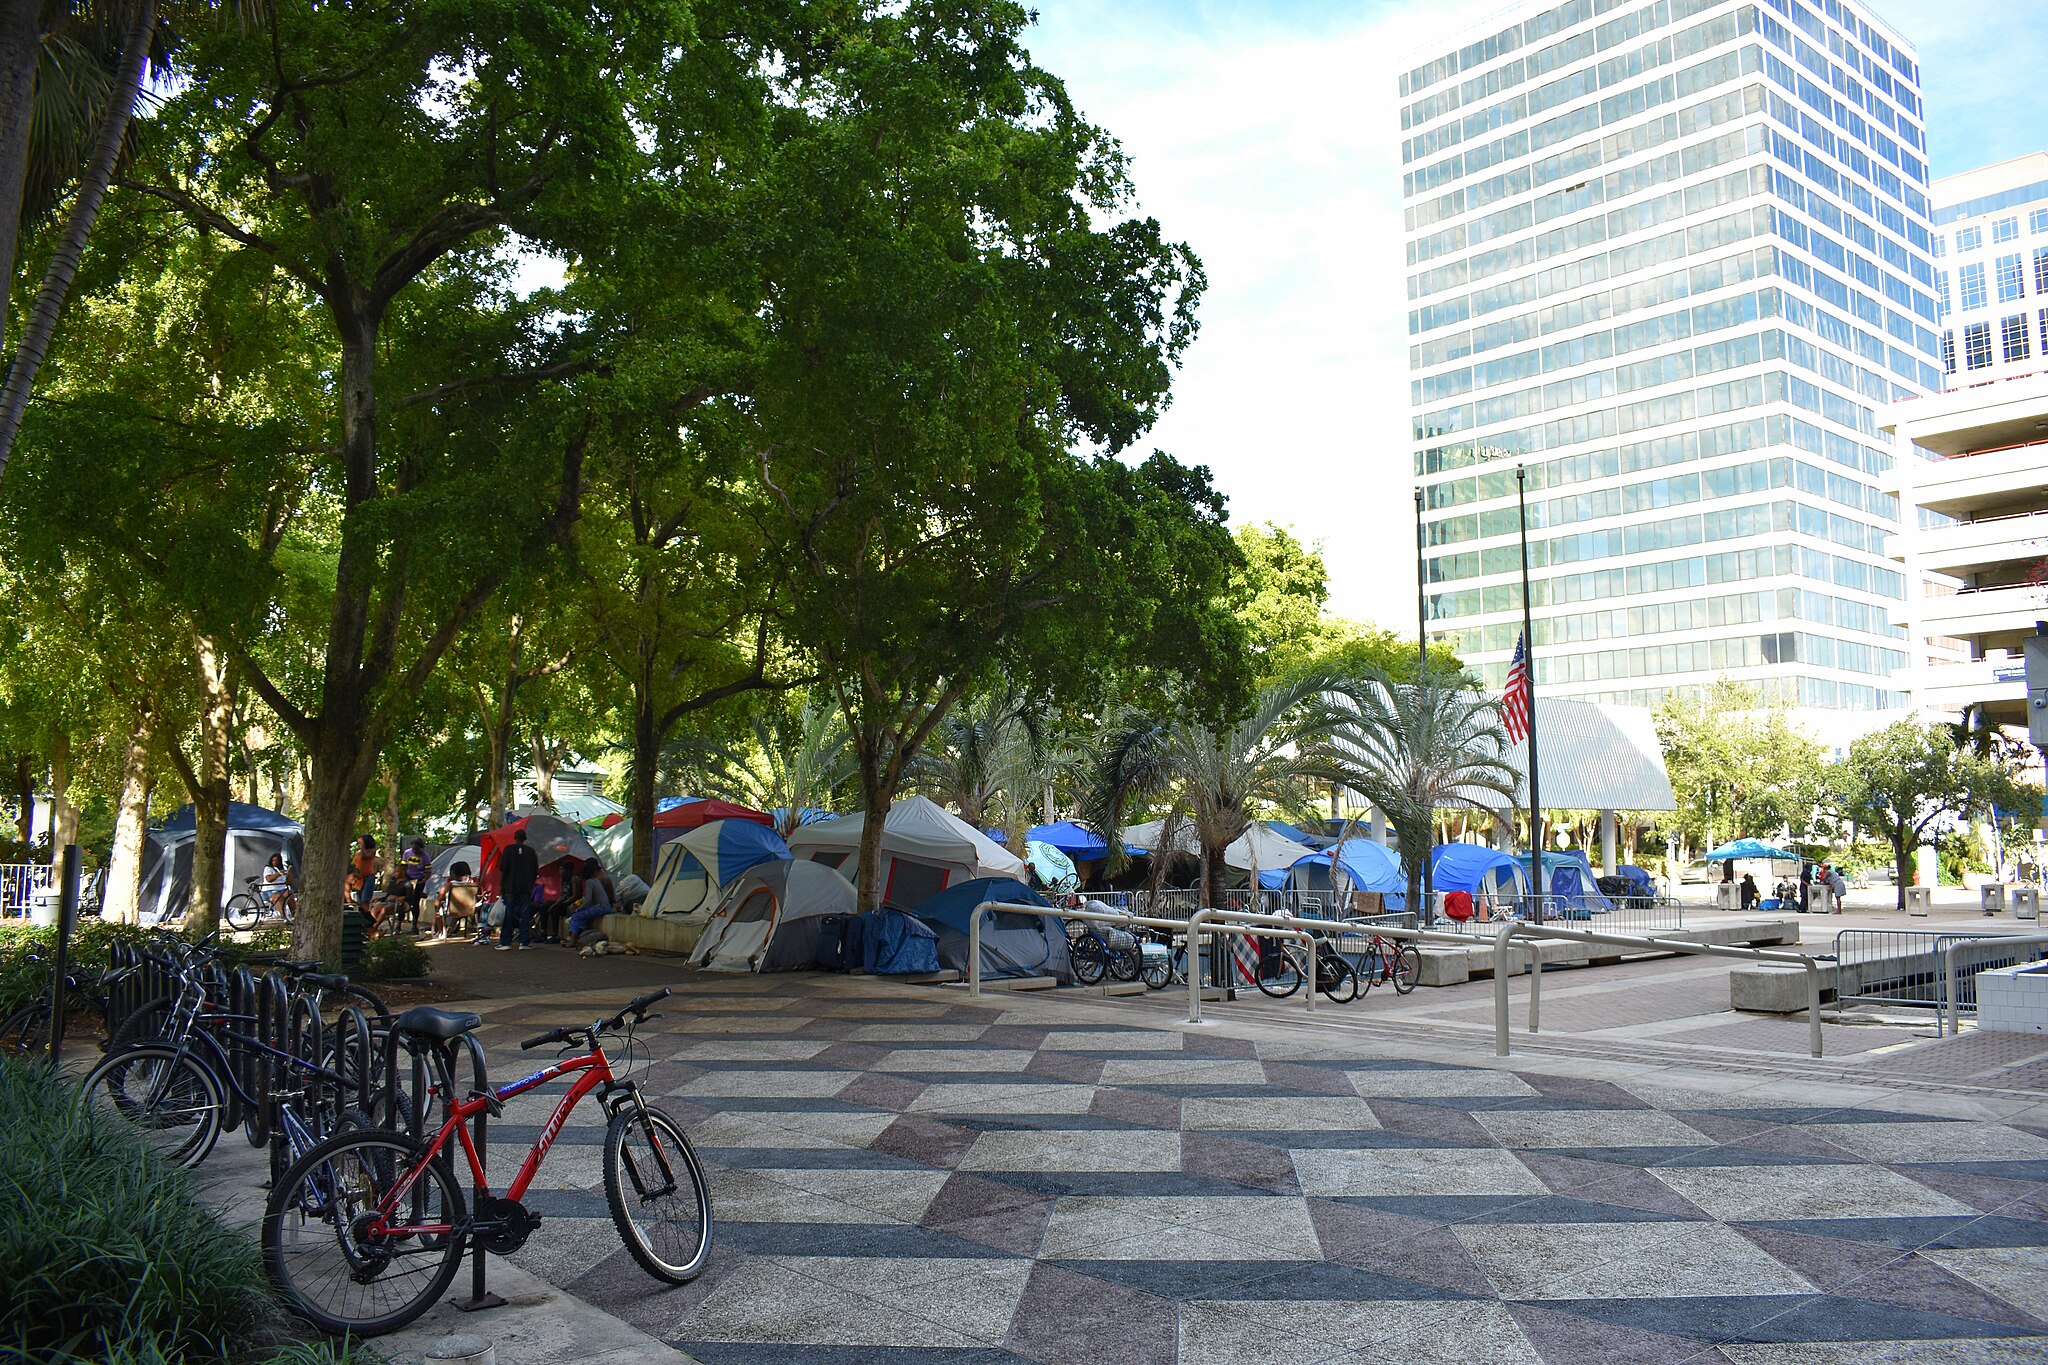 Florida governor signs law preventing homeless individuals from sleeping in public spaces